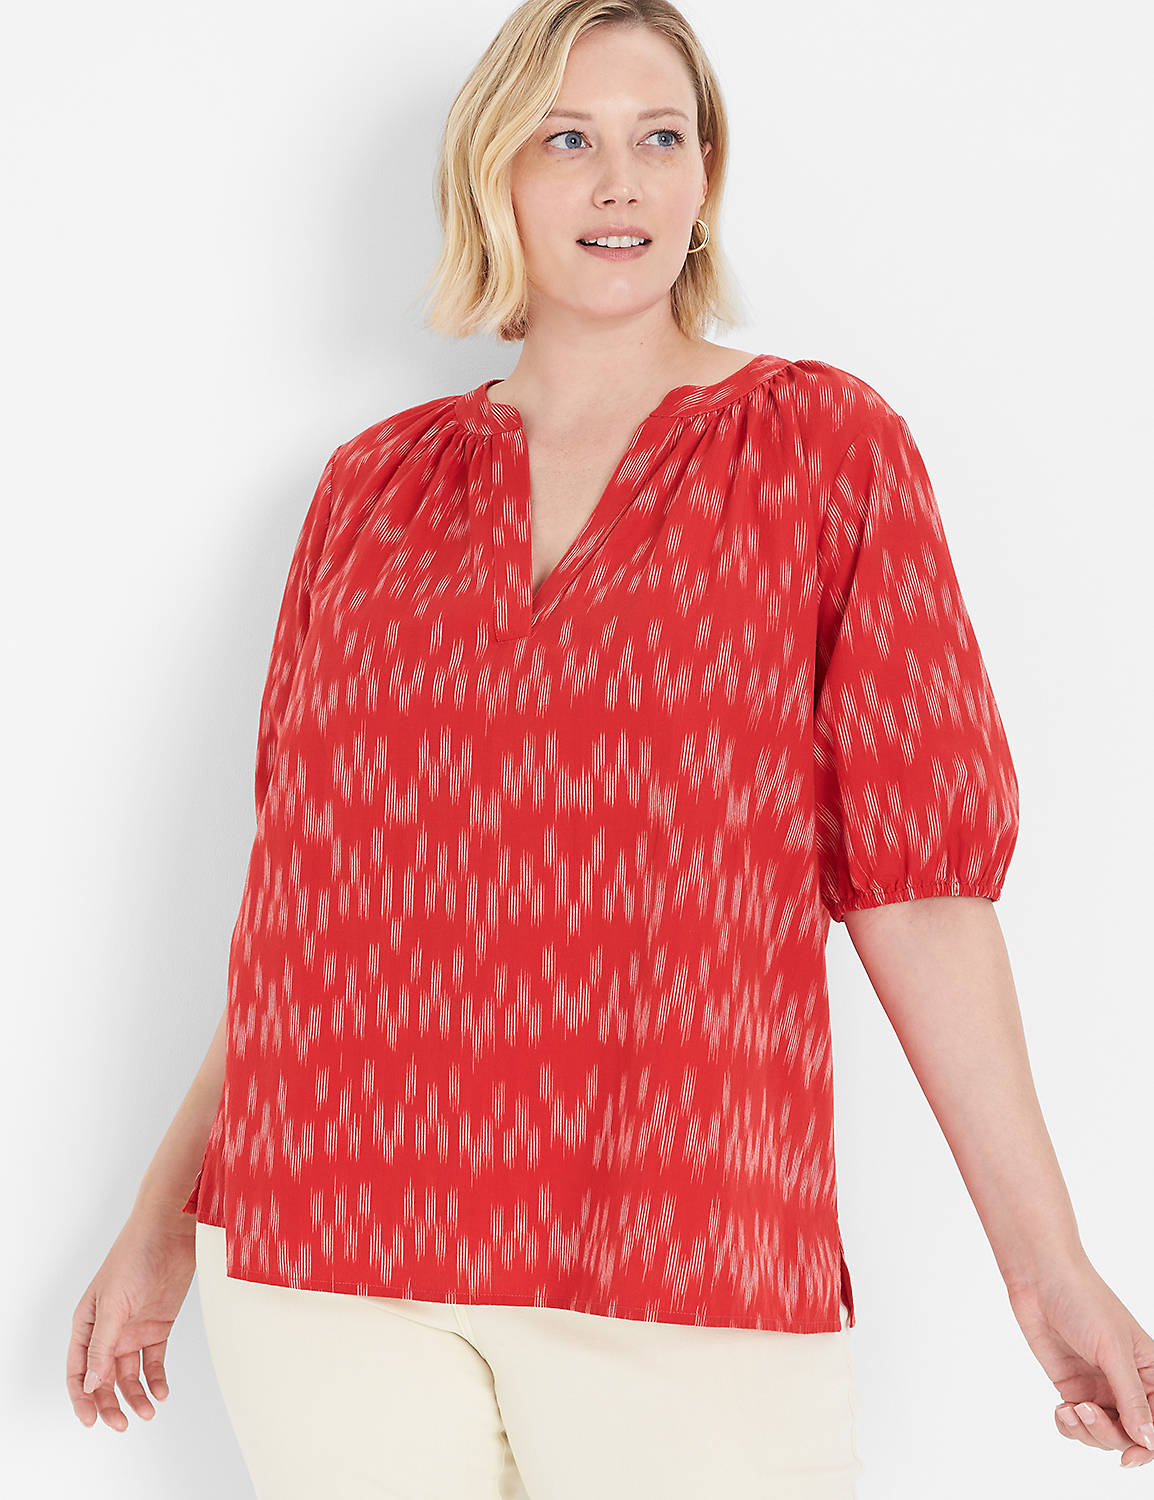 Classic Short Sleeve Popover Ikat 1 Product Image 1